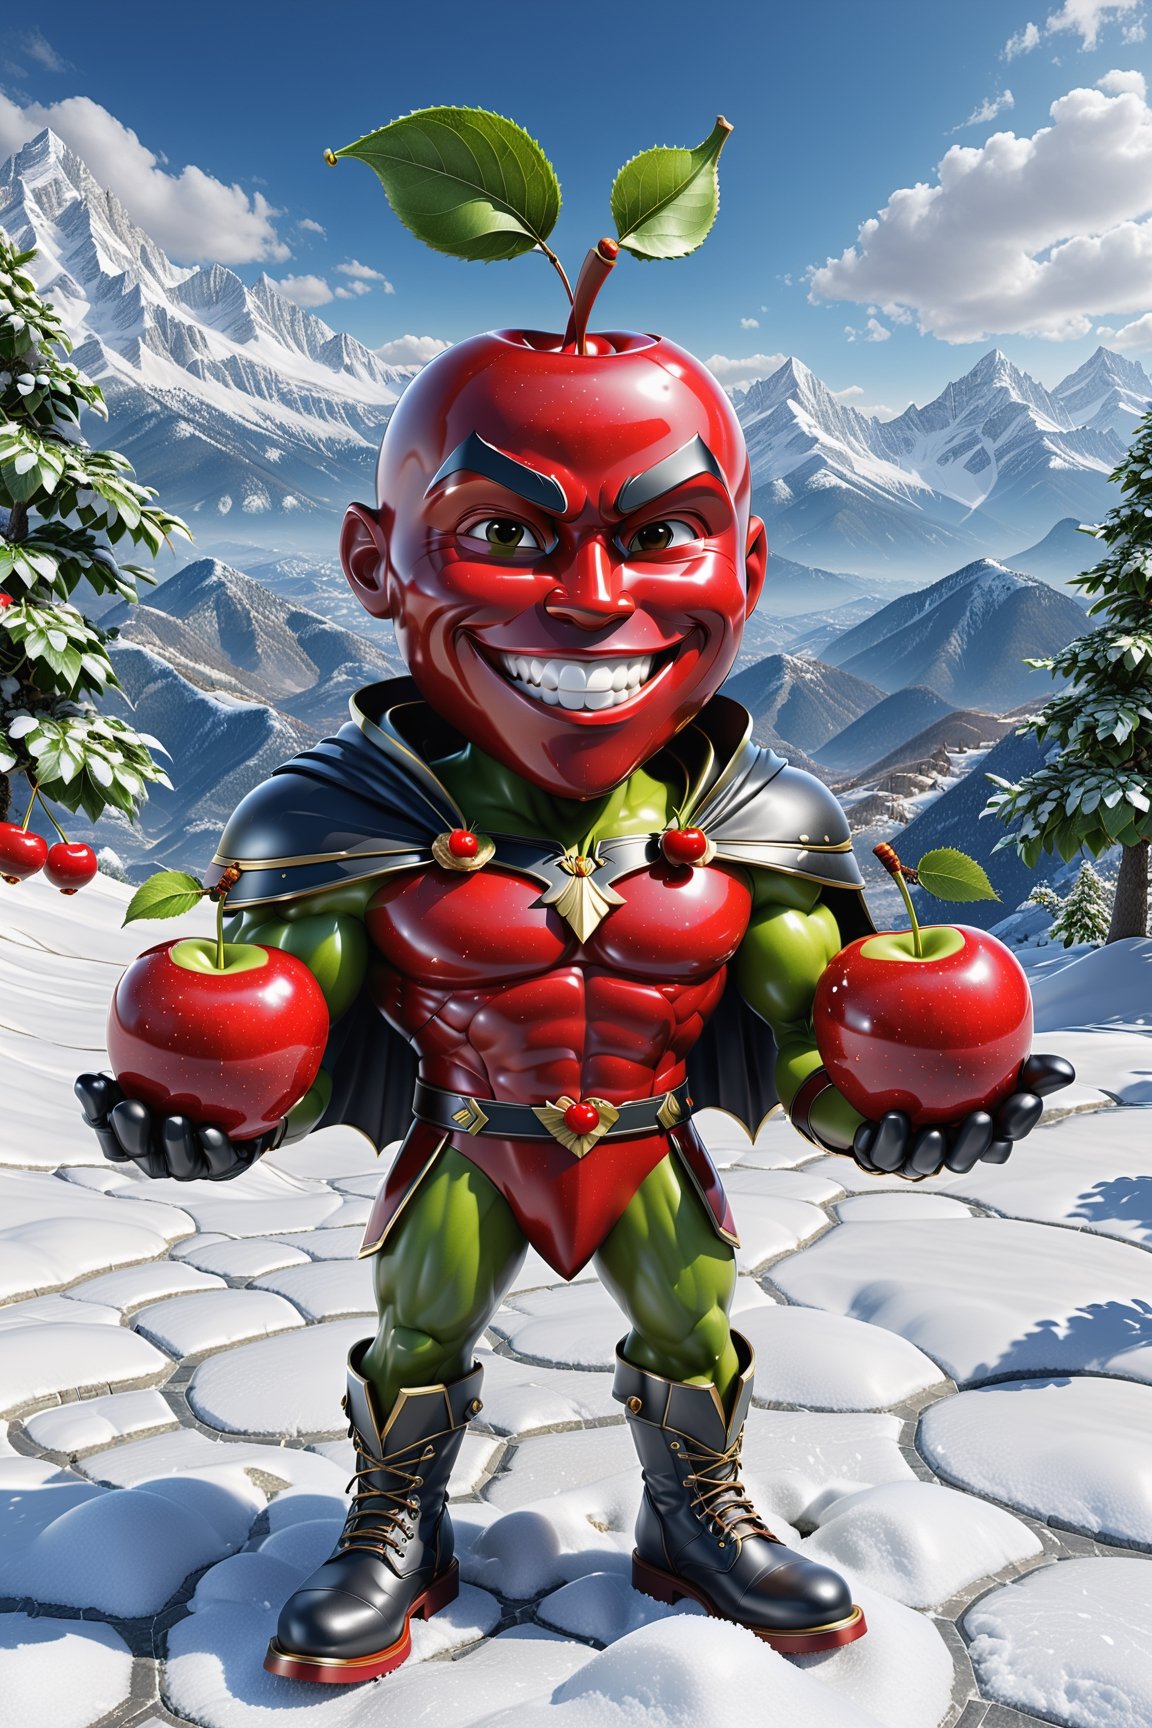 High definition photorealistic render of an incredible and mysterious character of a head fruit small cherry warrior, holding two cherries in his hands, with men muscles and a big smile, with boots and capes, in a mountains snow, with luxurious details in marble and metal and details in parametric architecture and art deco, the fruit It must be the head of the character full body pose fruit, themed fruit and fruit themed costumes, magical phantasy